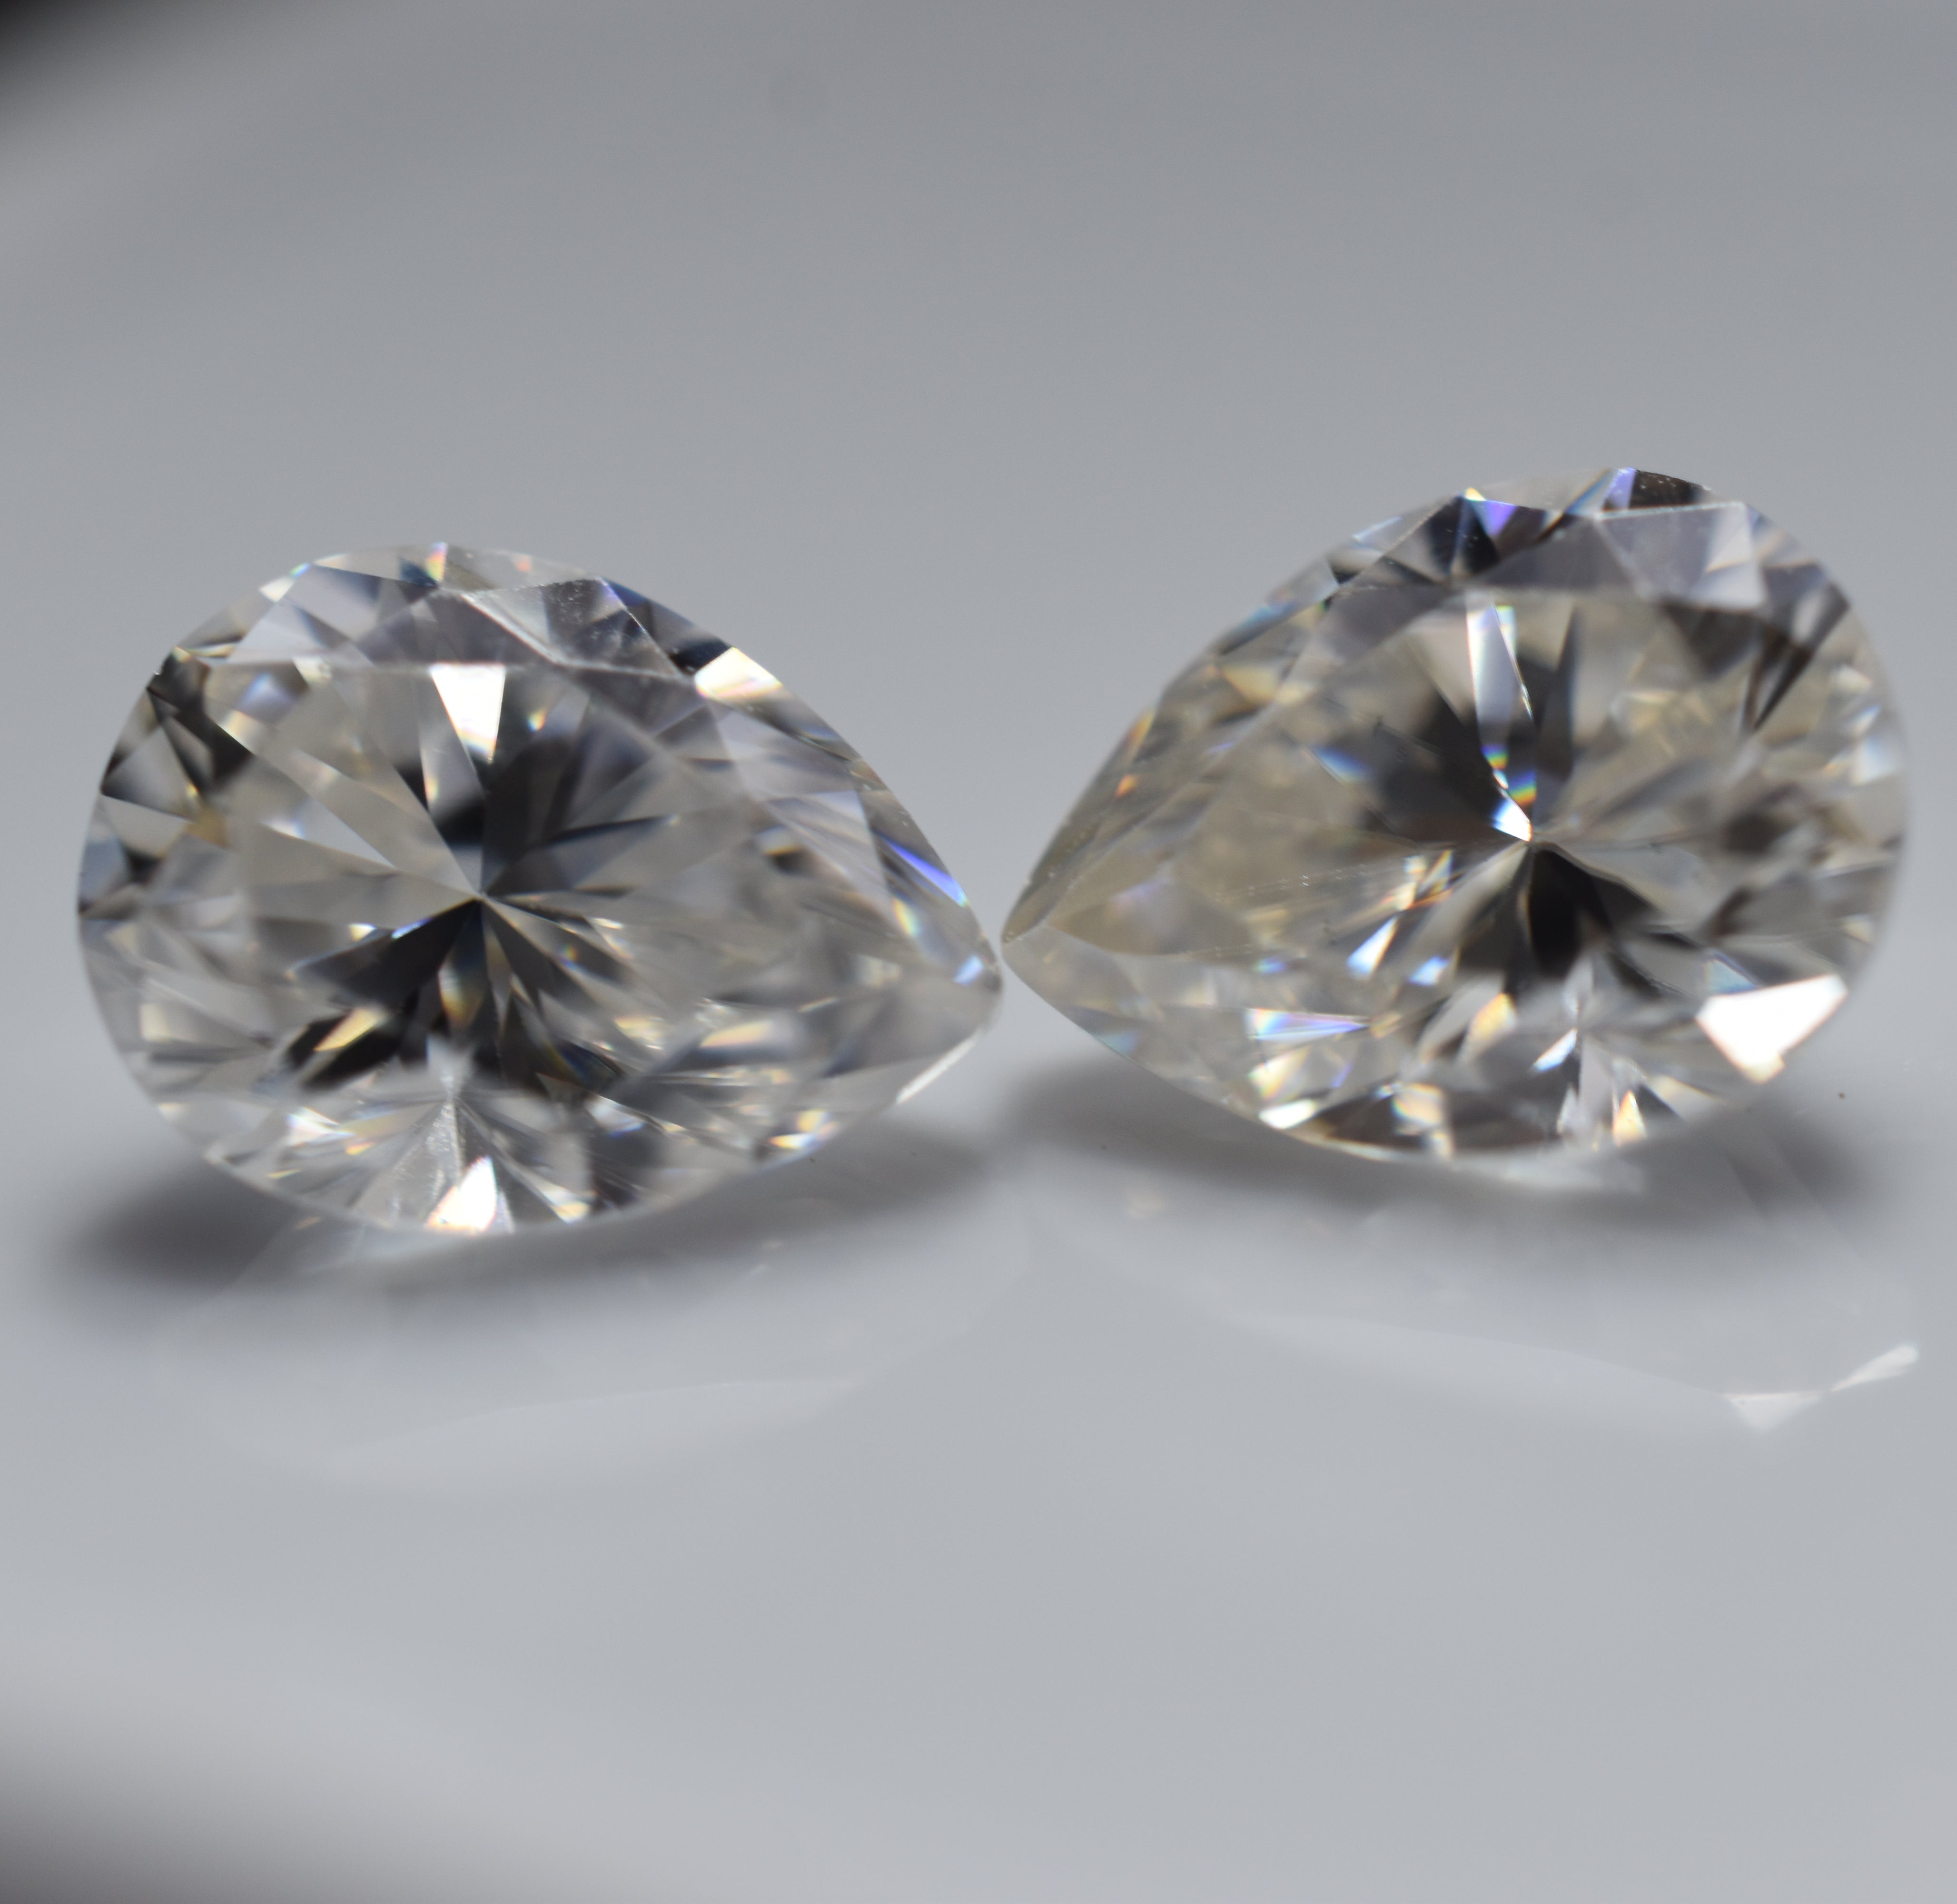 Moissanite Gem Special For Birthday Gift !! Pear Cut Moissanite Pair 2.00 Carat VVS1 D Color 2 Pcs Loose Gemstone CERTIFIED | Moissanite -Brilliance and Sparkle